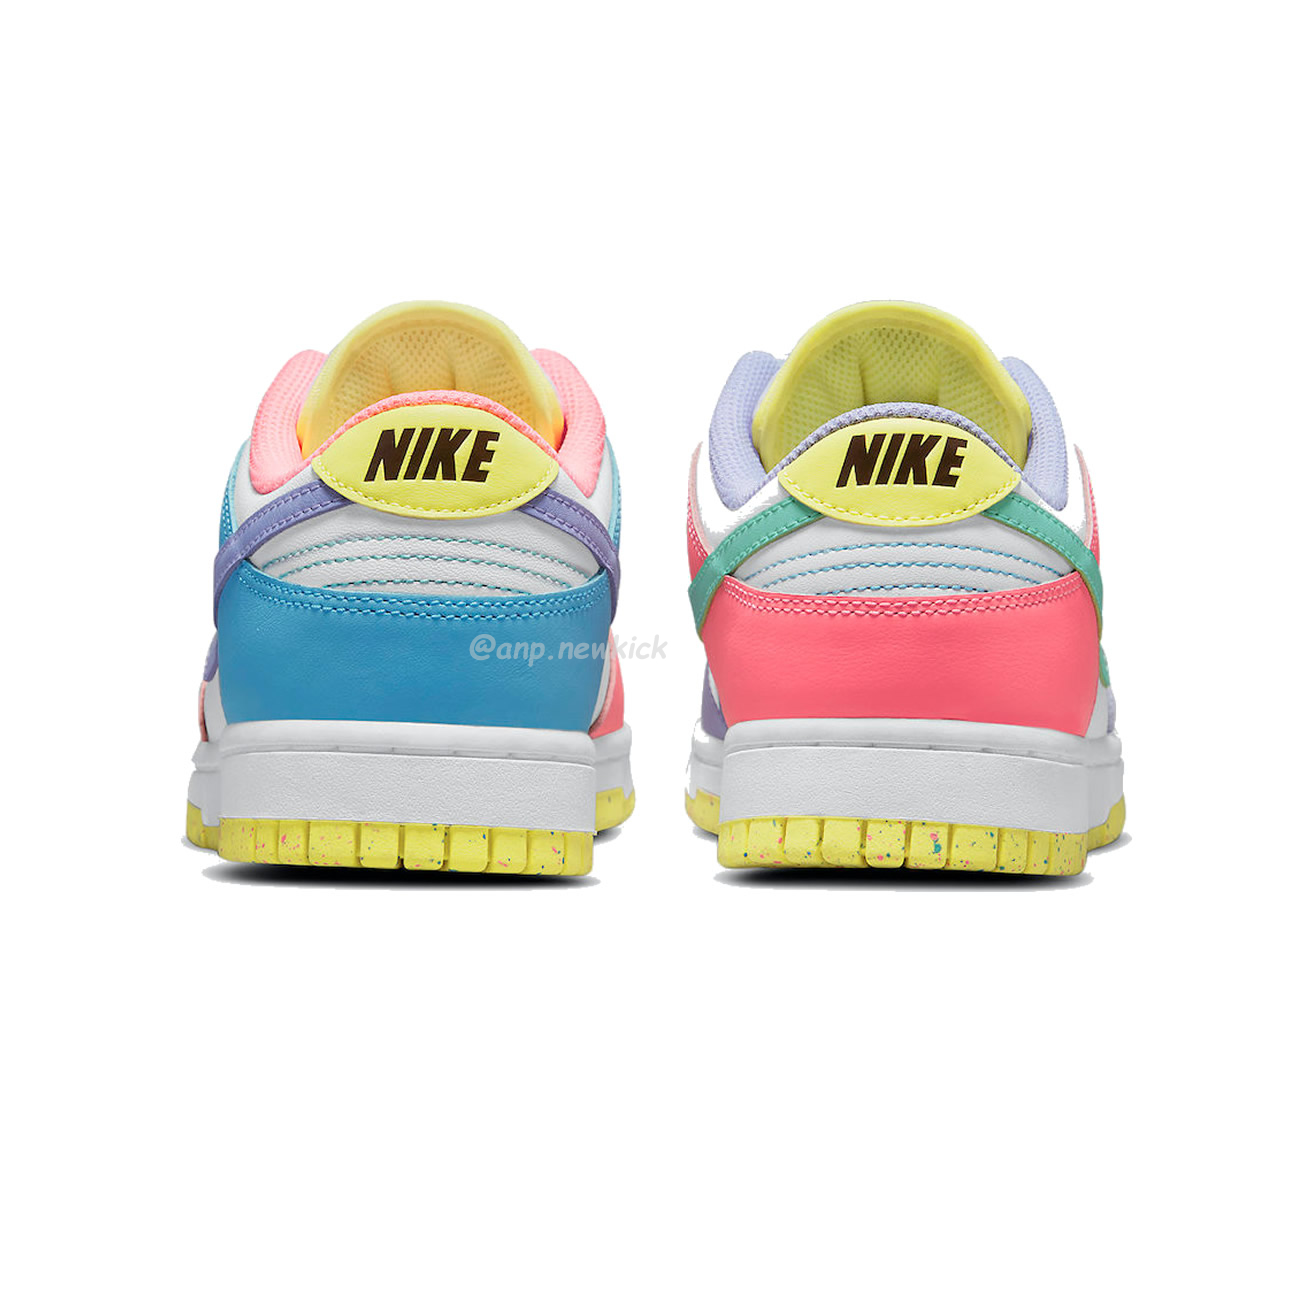 Nike Dunk Low Se Easter Candy Dd1872 100 (12) - newkick.org